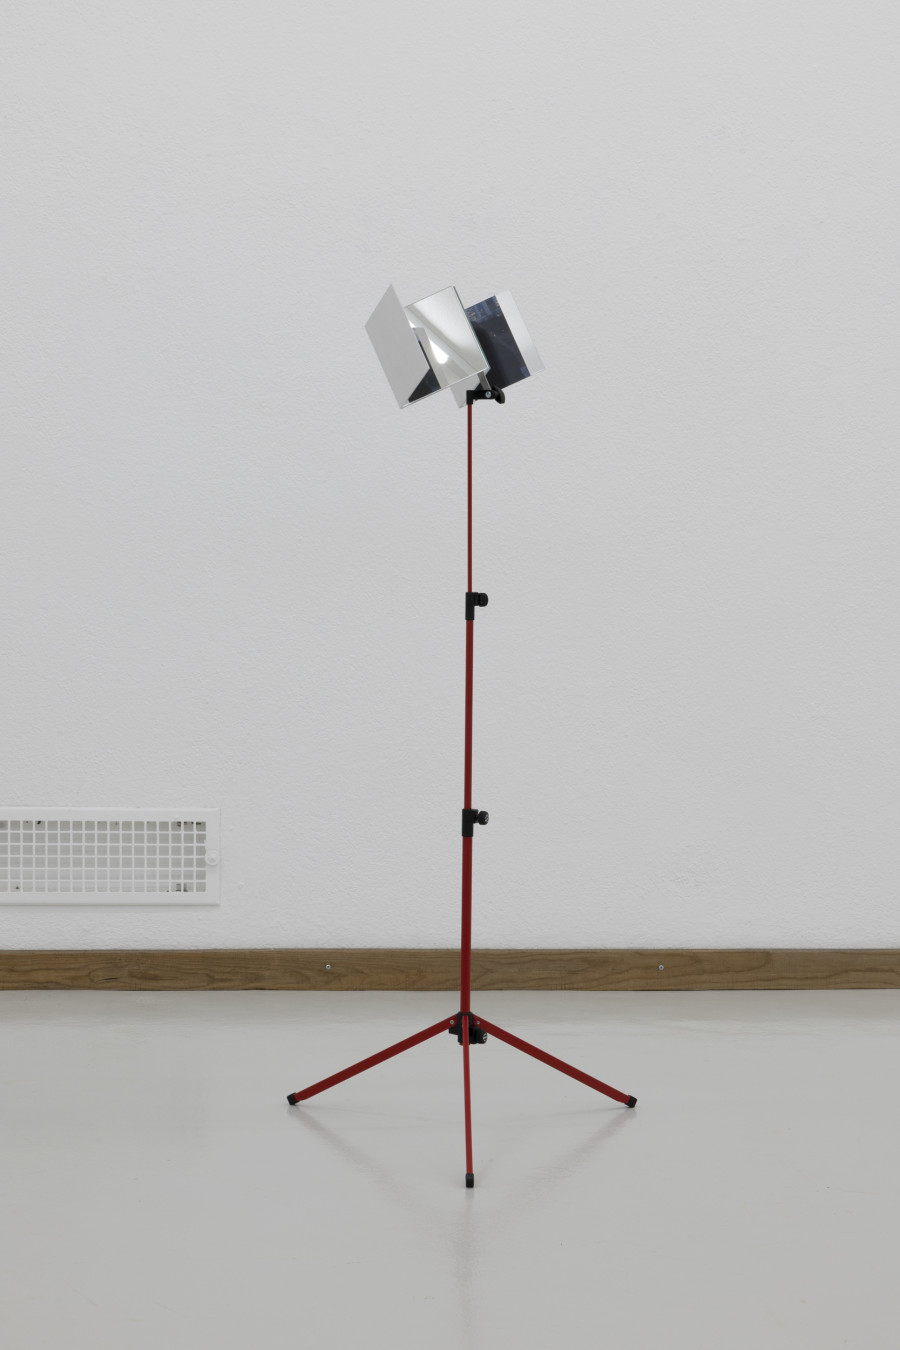 Emanuel Rossetti, Leonie, 2024. Two digital c-prints on Fuji Crystal Archive paper, mounted on aluminum, mirrors, music-stand, 140 x 30 x 25 cm. Emanuel Rossetti, Stimmung, installation view, Kunsthaus Glarus, 2024. Photo: Gina Folly. Courtesy of the artist, Karma International, Zurich and Jan Kaps, Cologne.